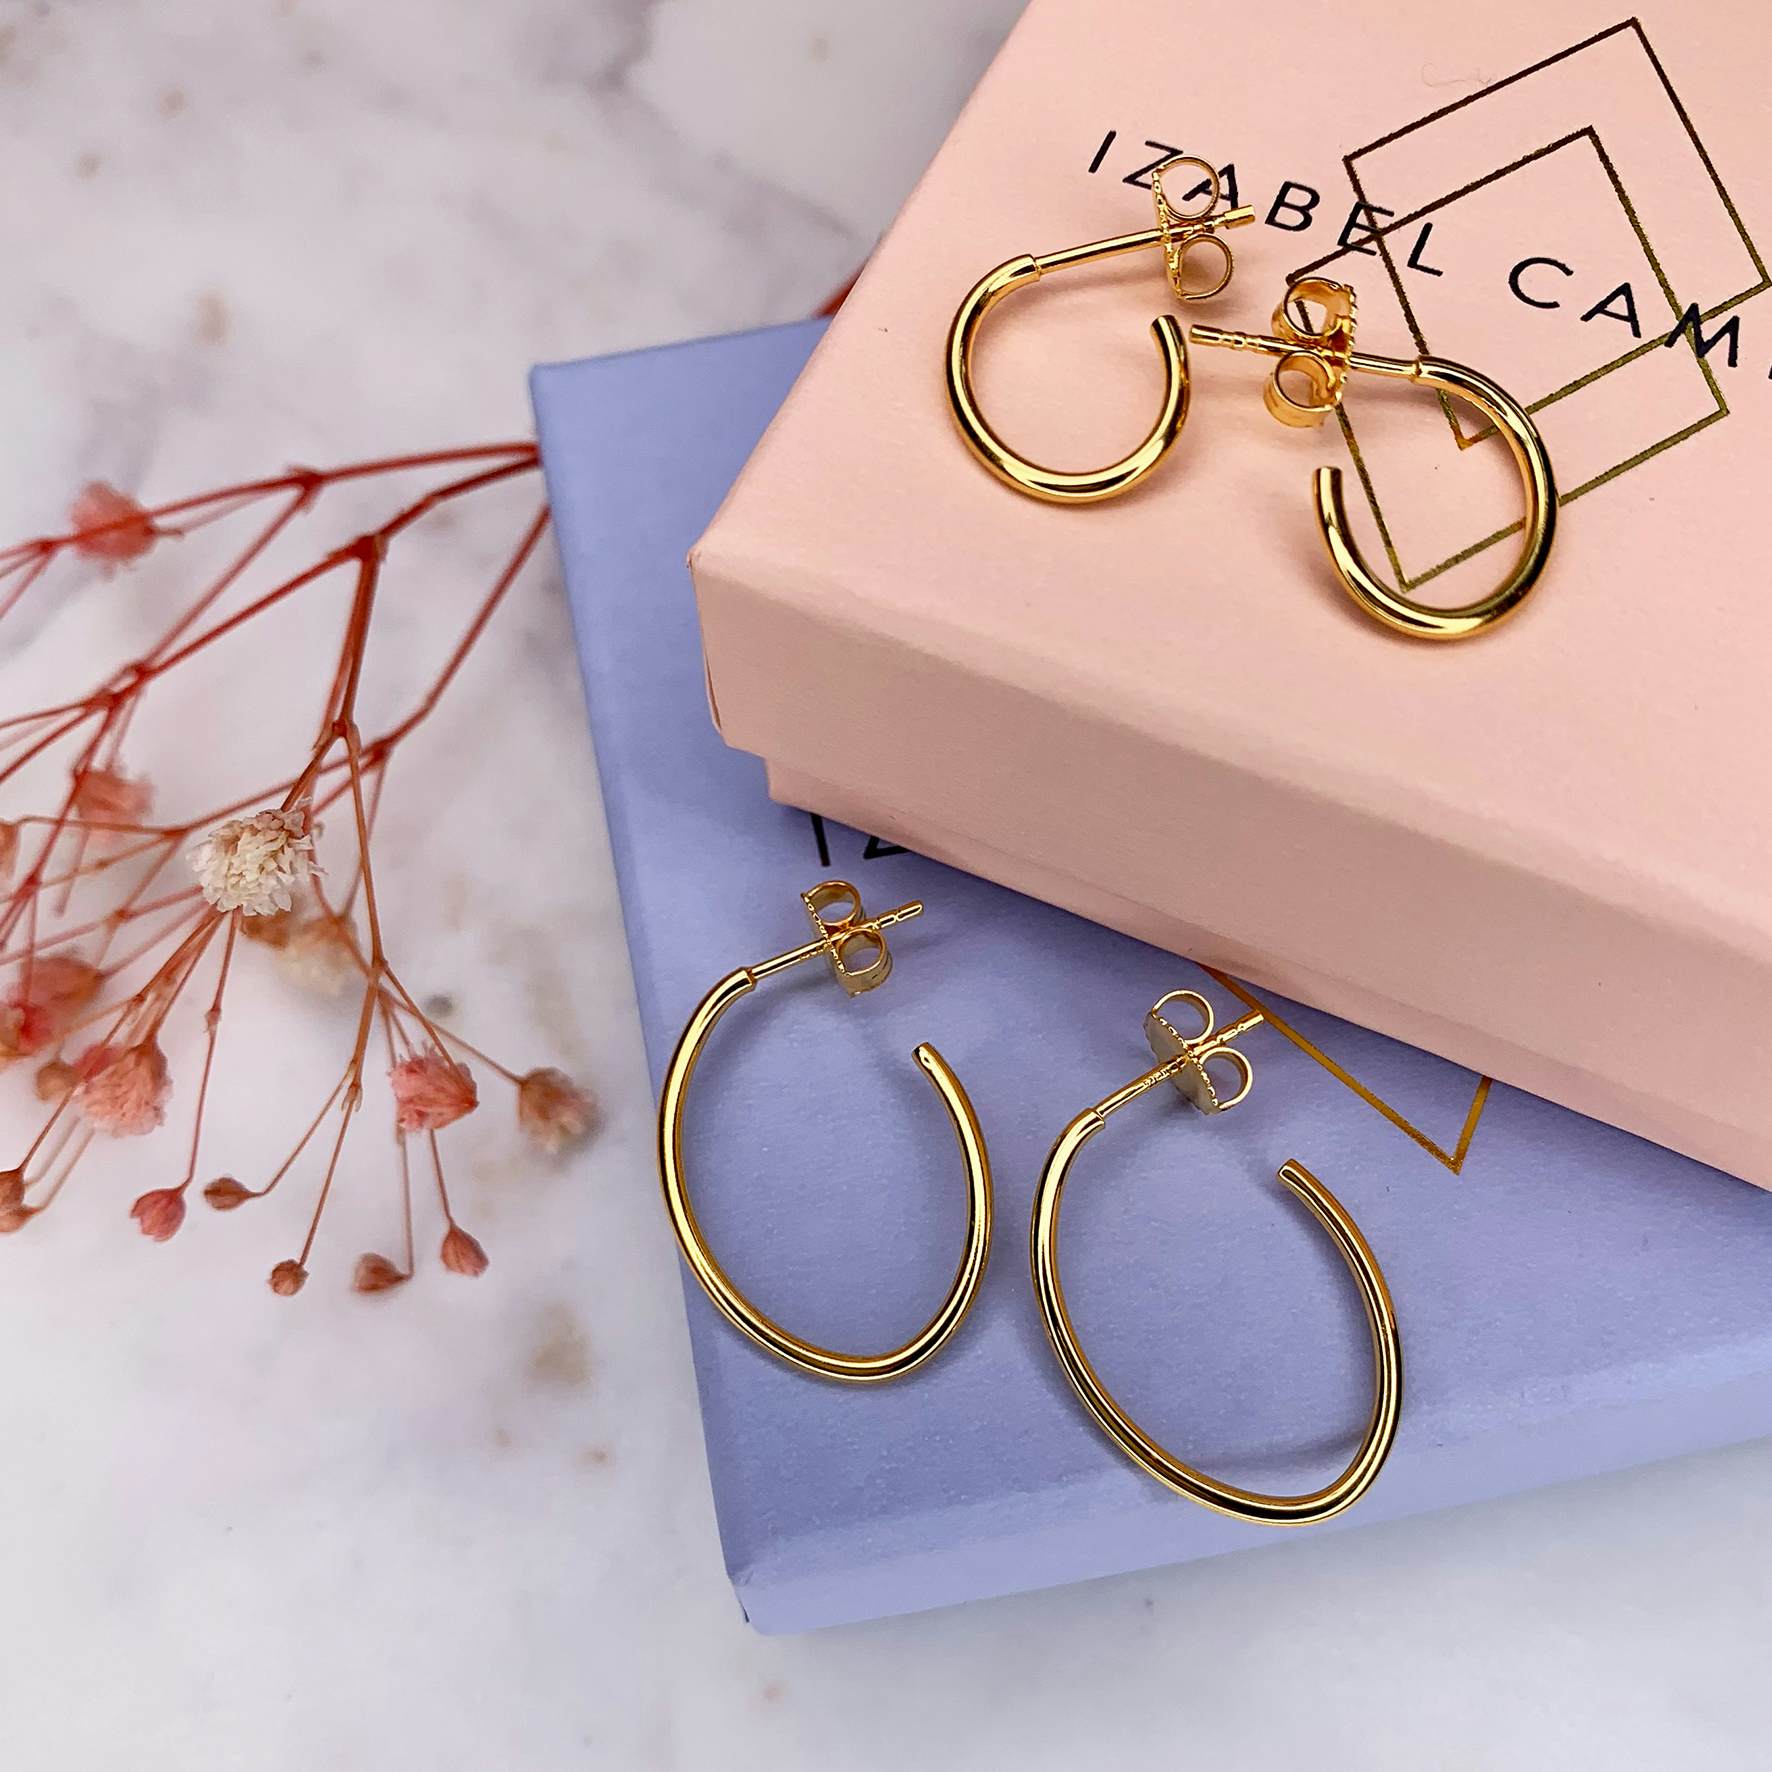 Endless Earrings from Izabel Camille in Goldplated-Silver Sterling 925